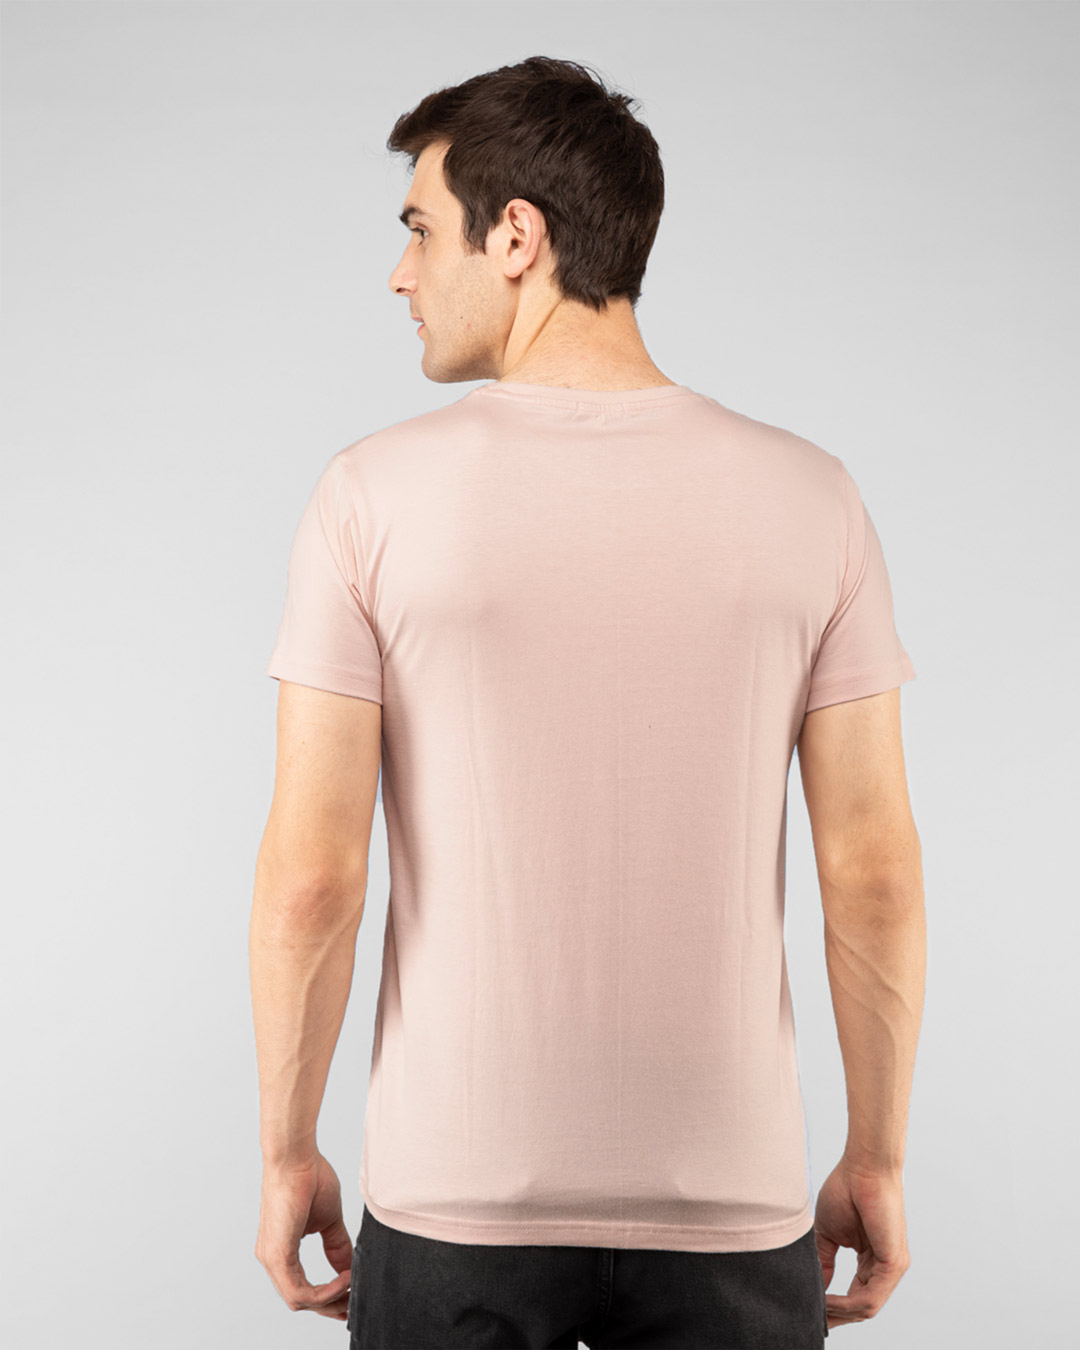 Shop I Would Prefer Neat Half Sleeve T-Shirt Baby Pink-Back